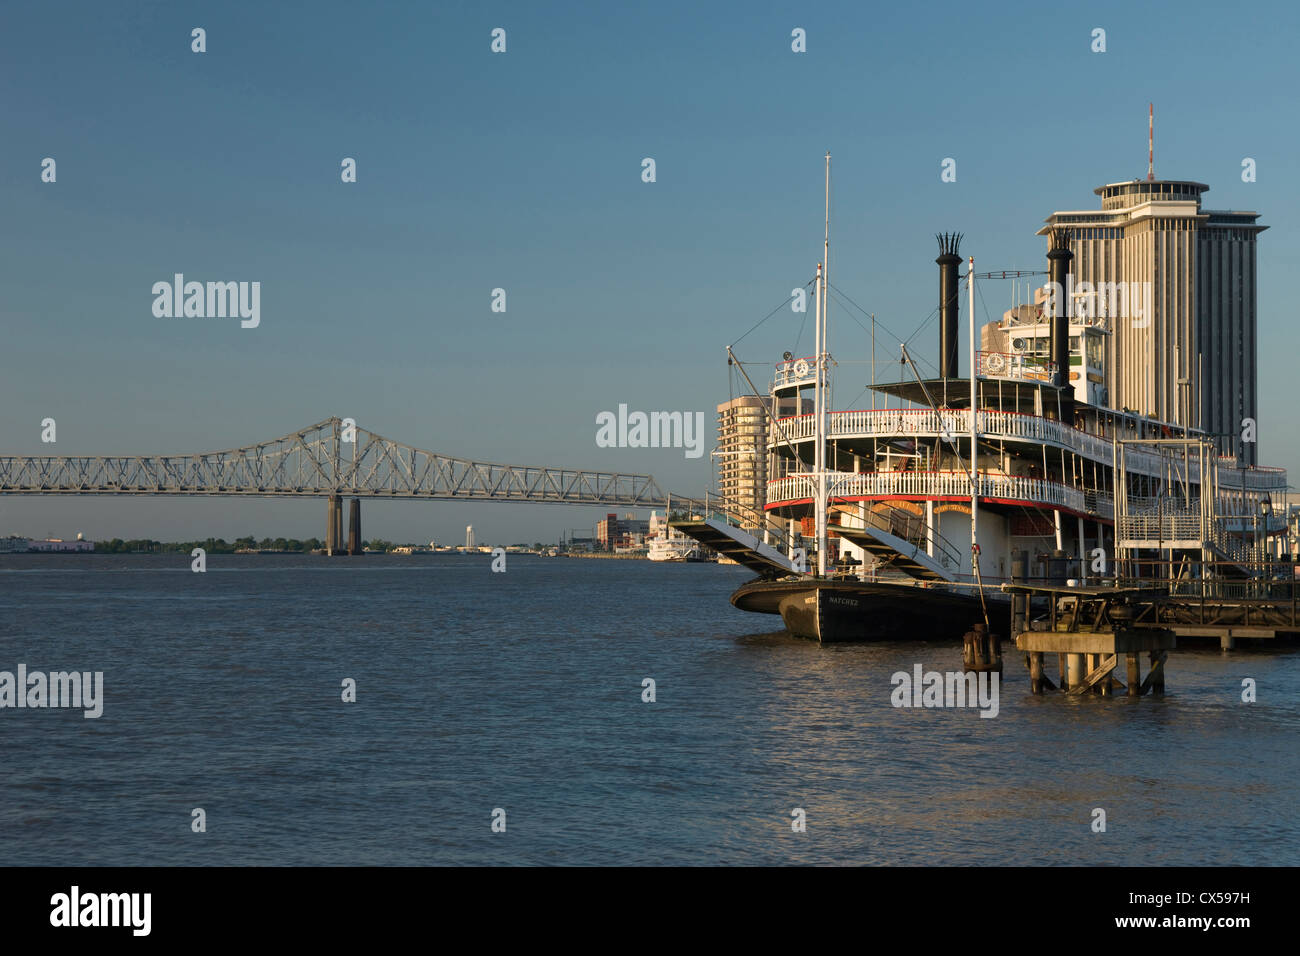 NATCHEZ STEAMBOAT PADDLE STEAMER MOORED AT MOONWALK WALDENBERG PARK WATERFRONT FRENCH QUARTER DOWNTOWN NEW ORLEANS LOUISIANA USA Stock Photo